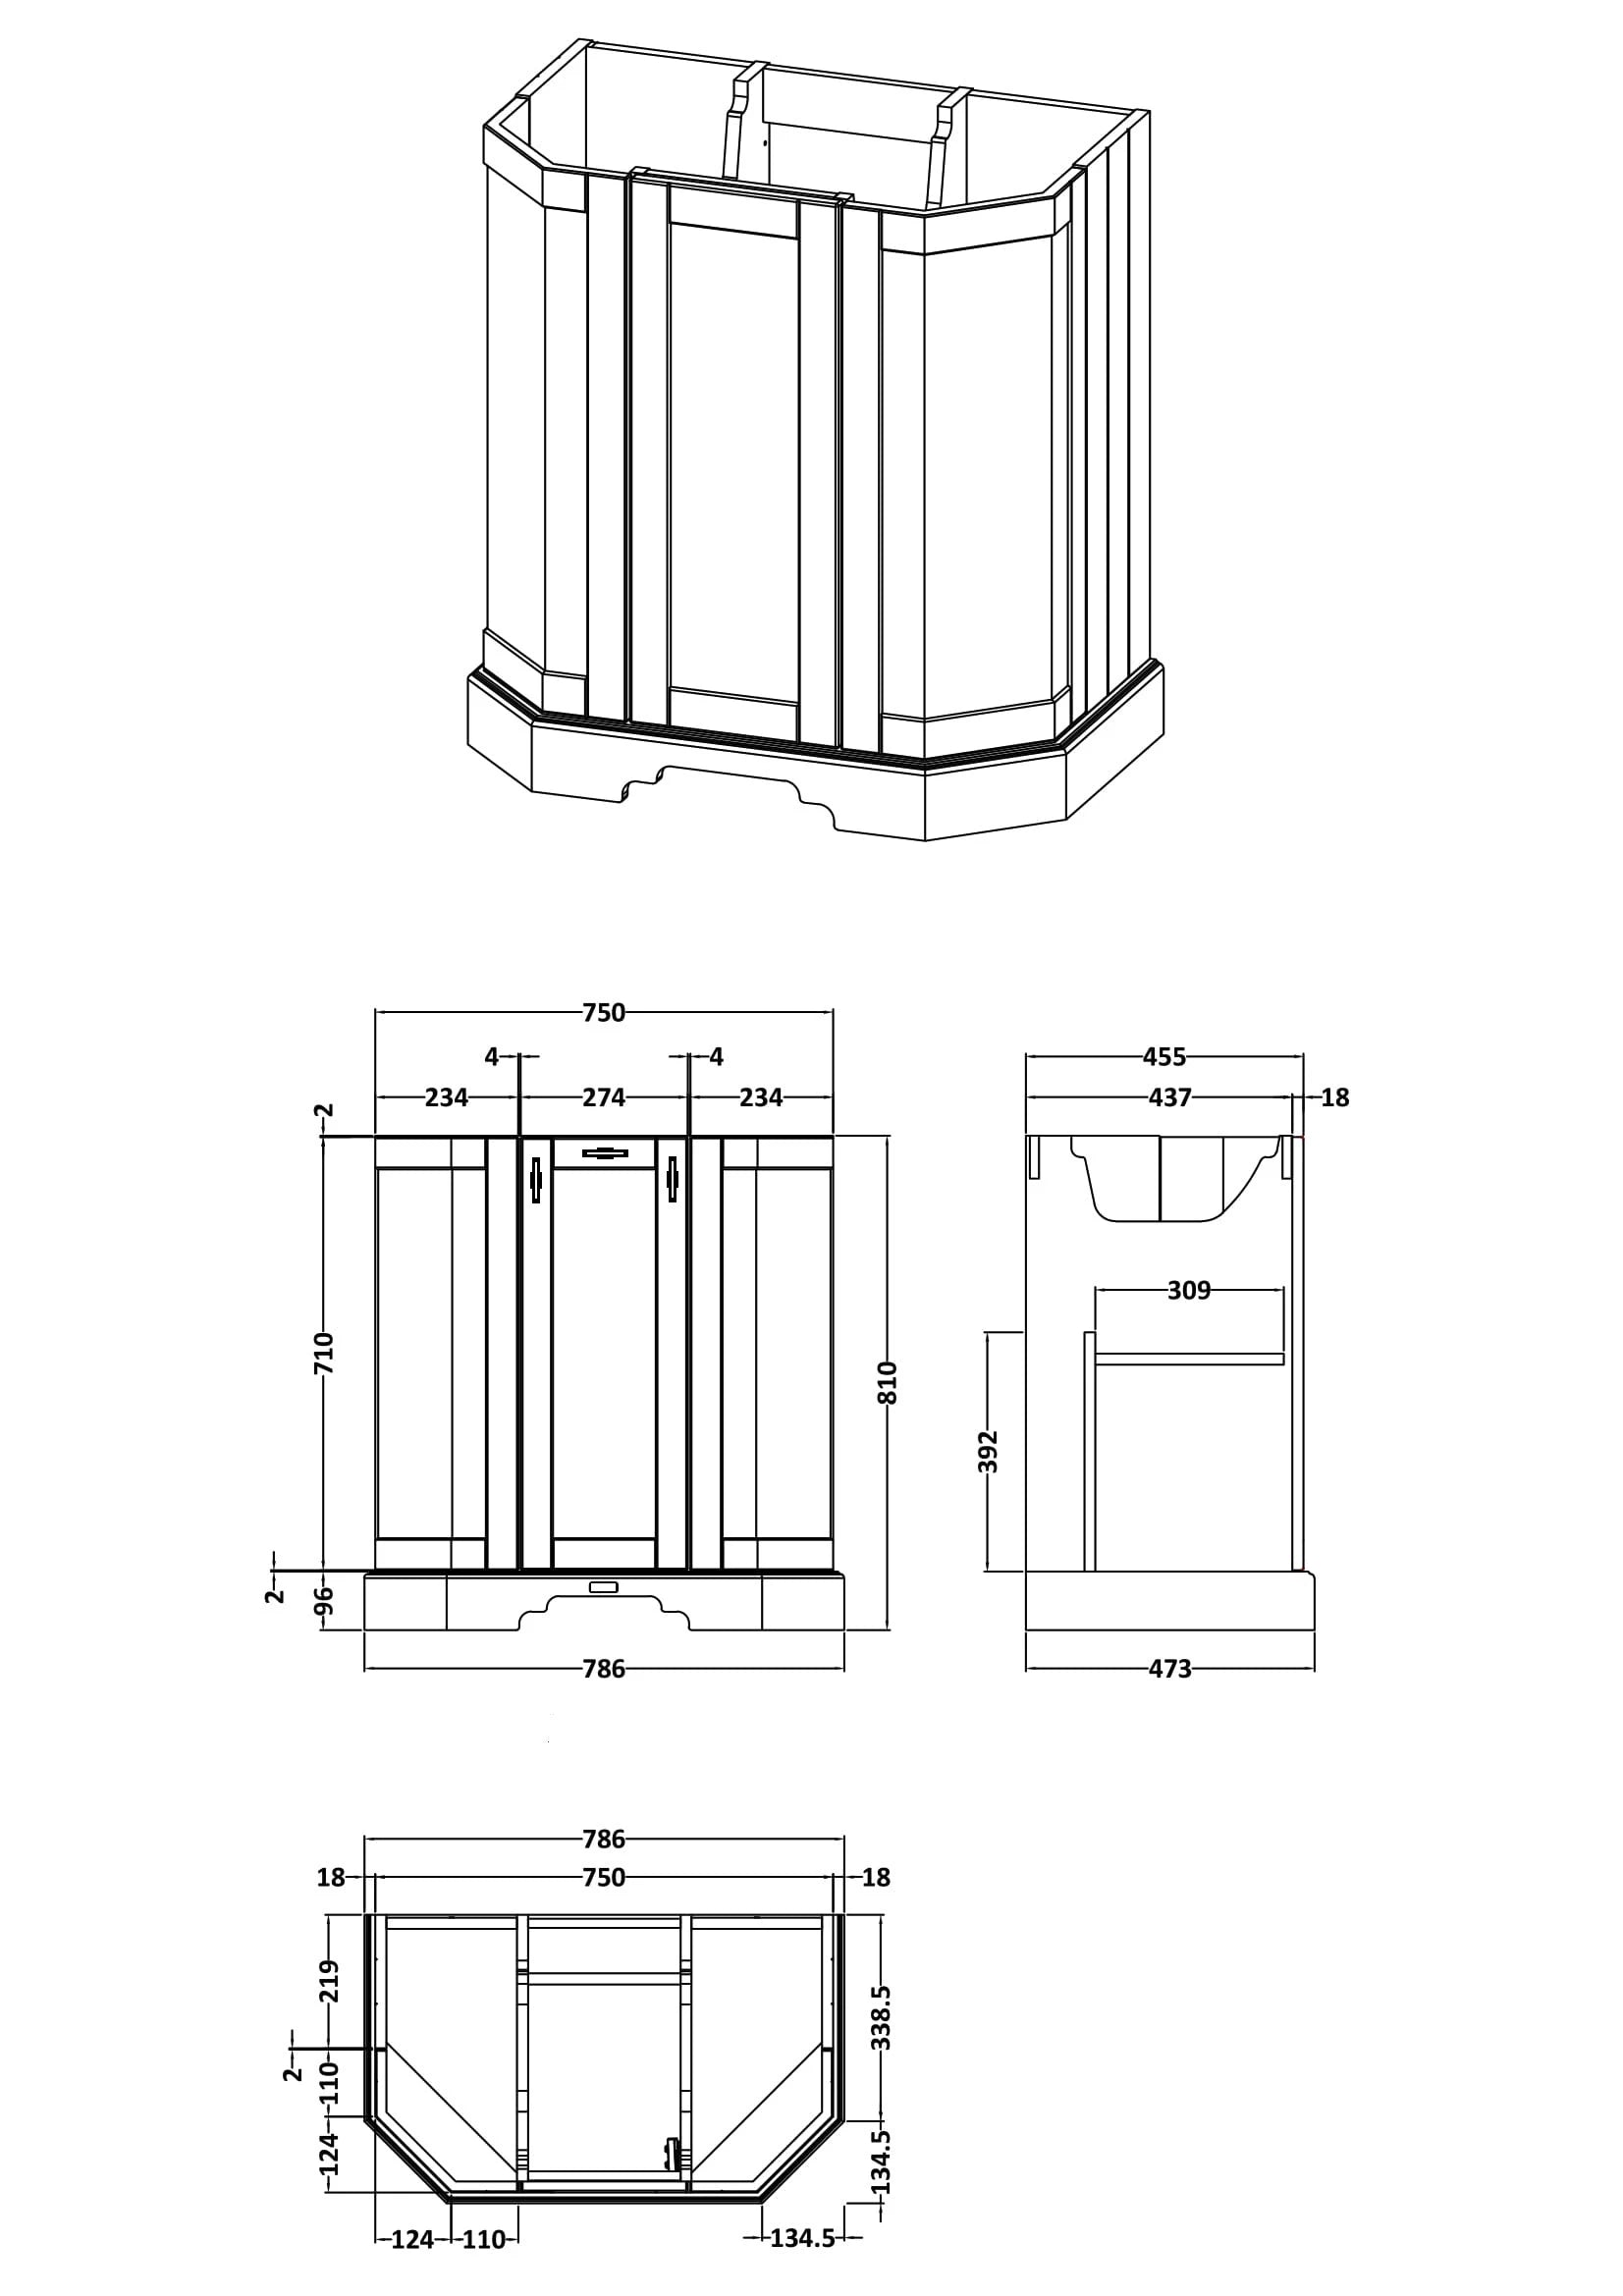 BC Designs Victrion Angled Vanity Unit & Marble Basin, Earl's Grey - 750mm specifcation technical drawing